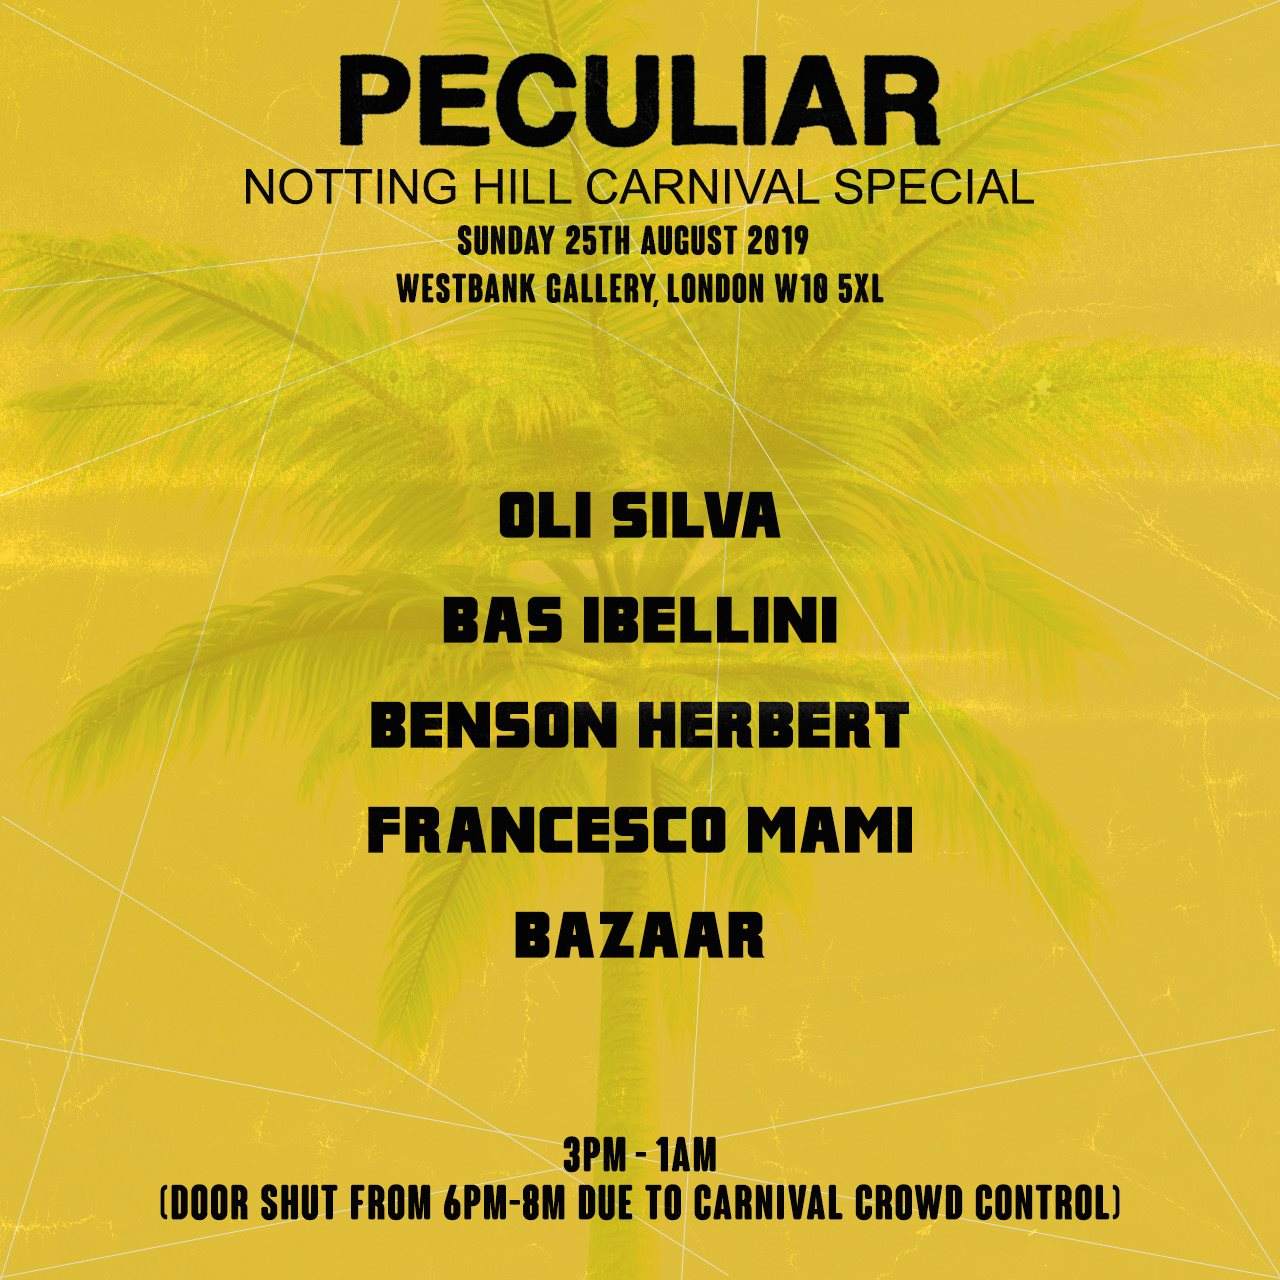 Peculiar **Notting Hill Carnival Special** Sunday 25th August - Página frontal